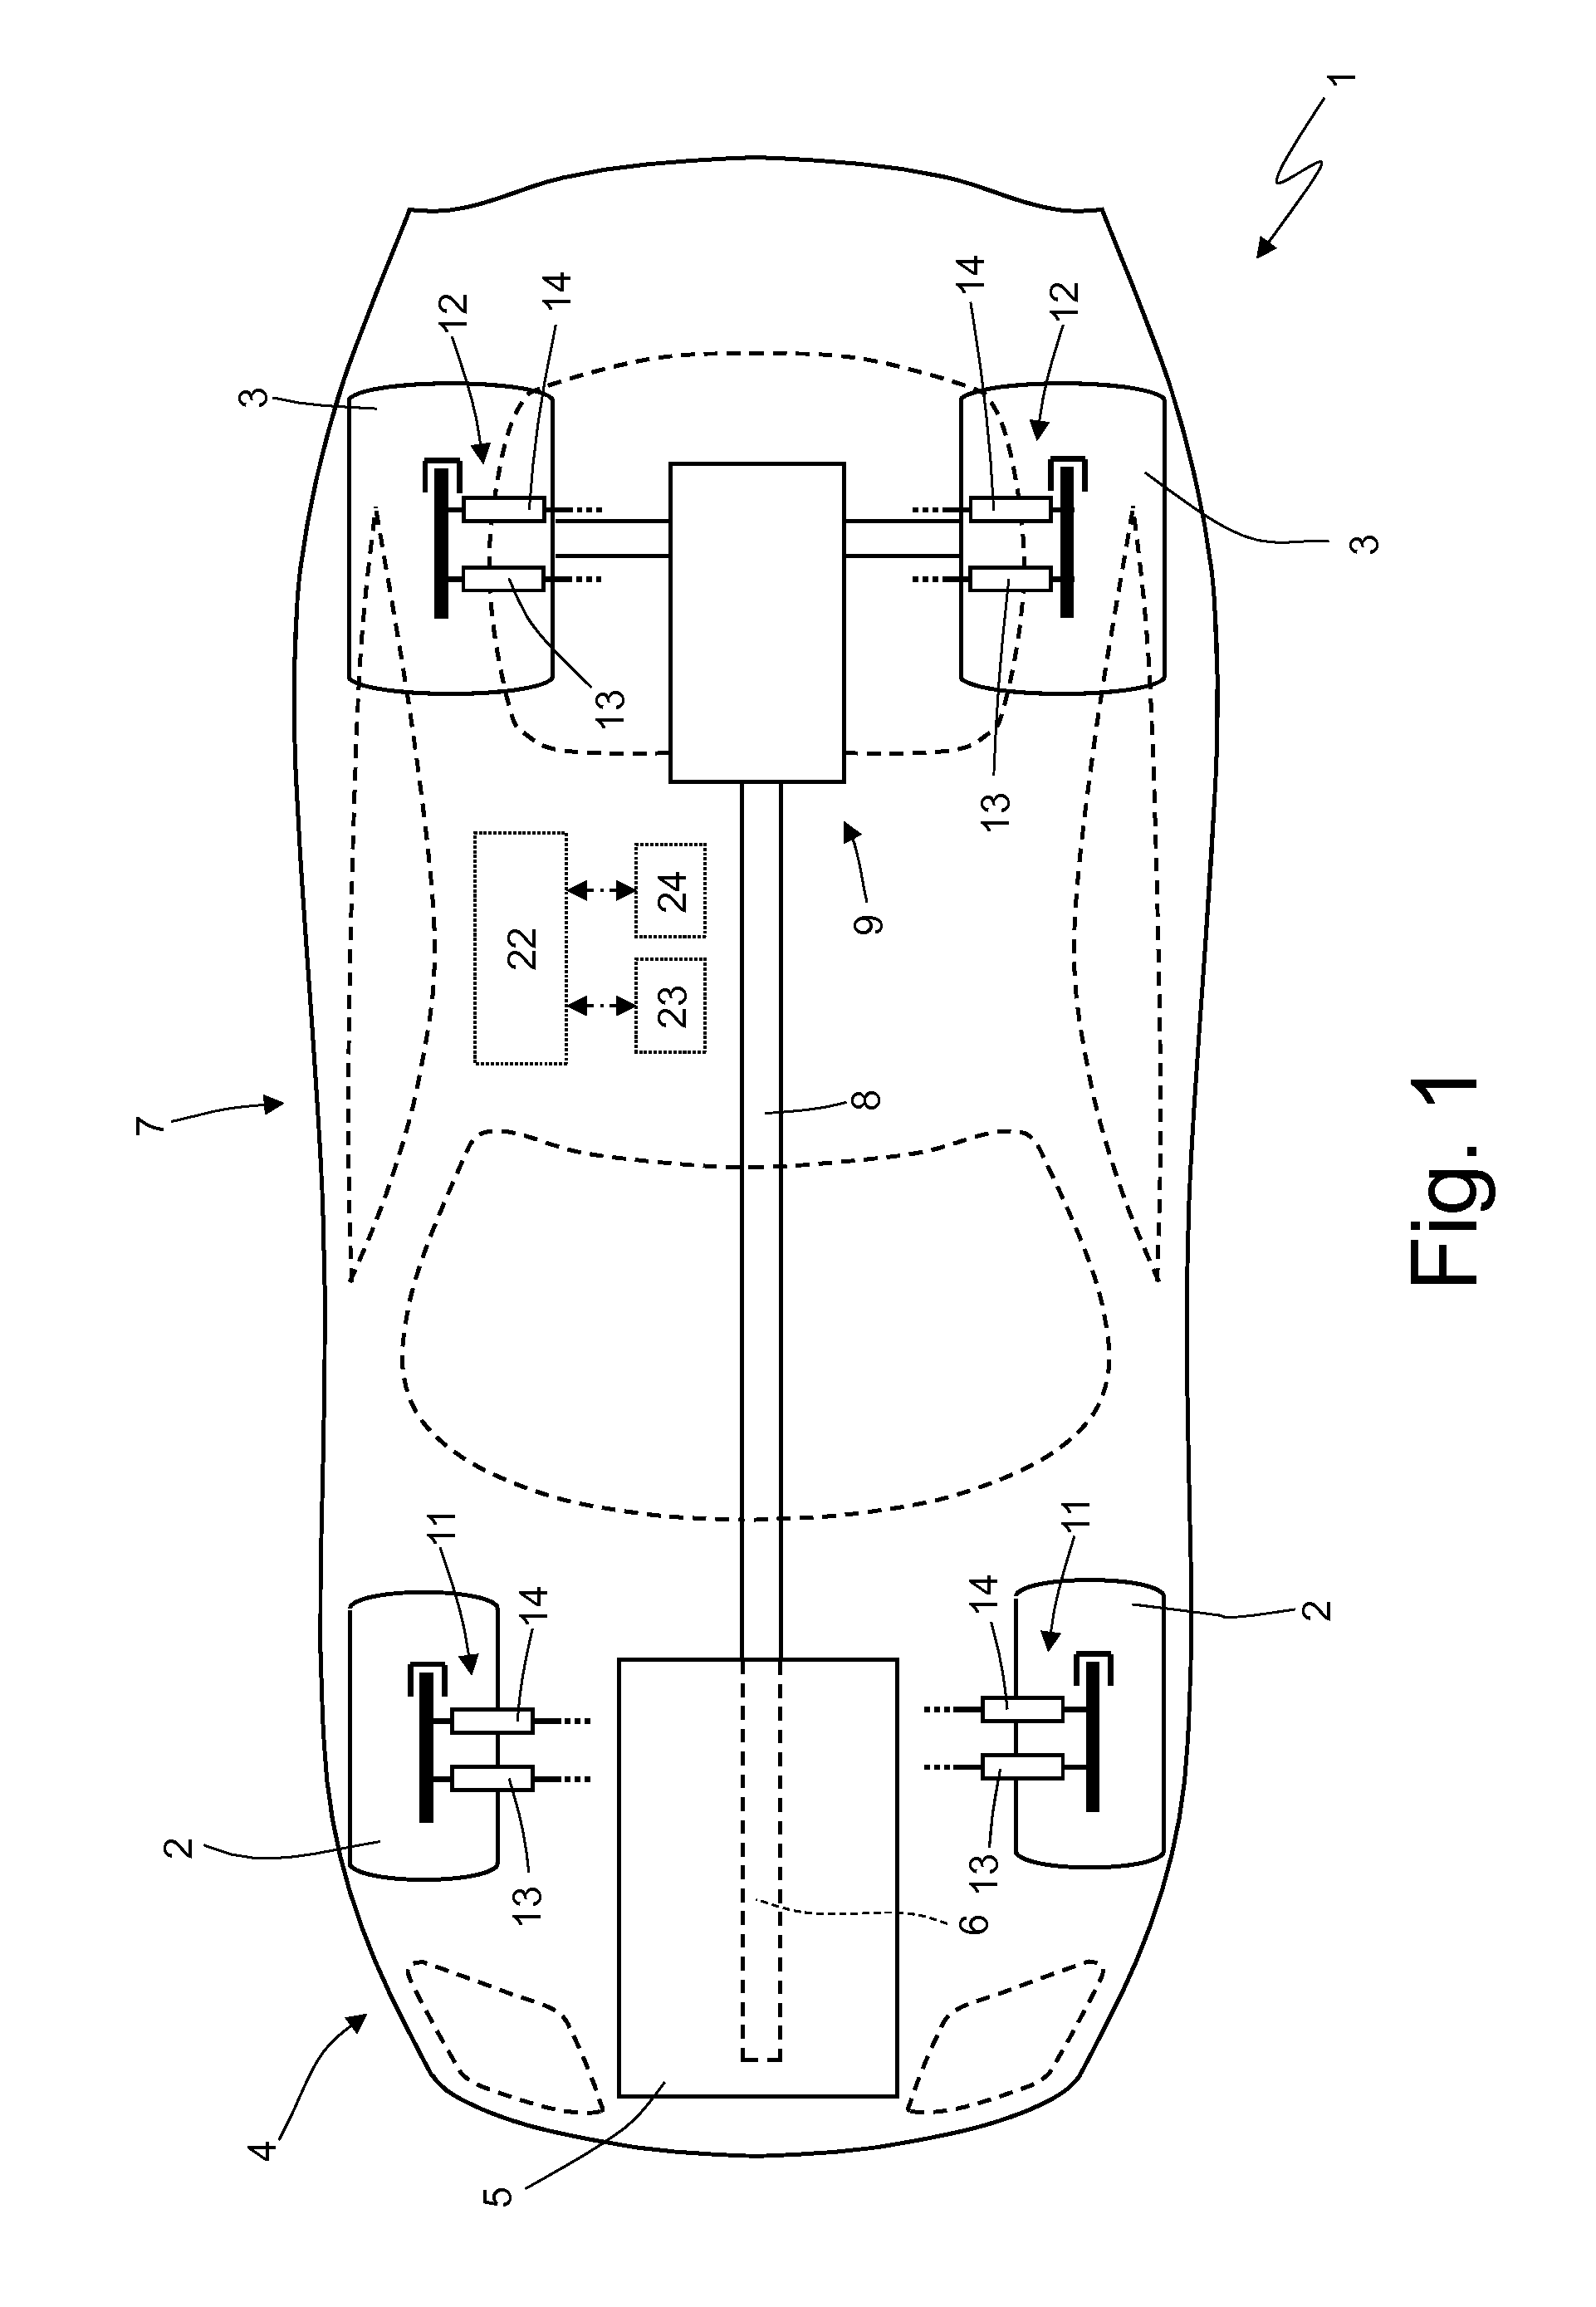 Control method of an active suspension of a car